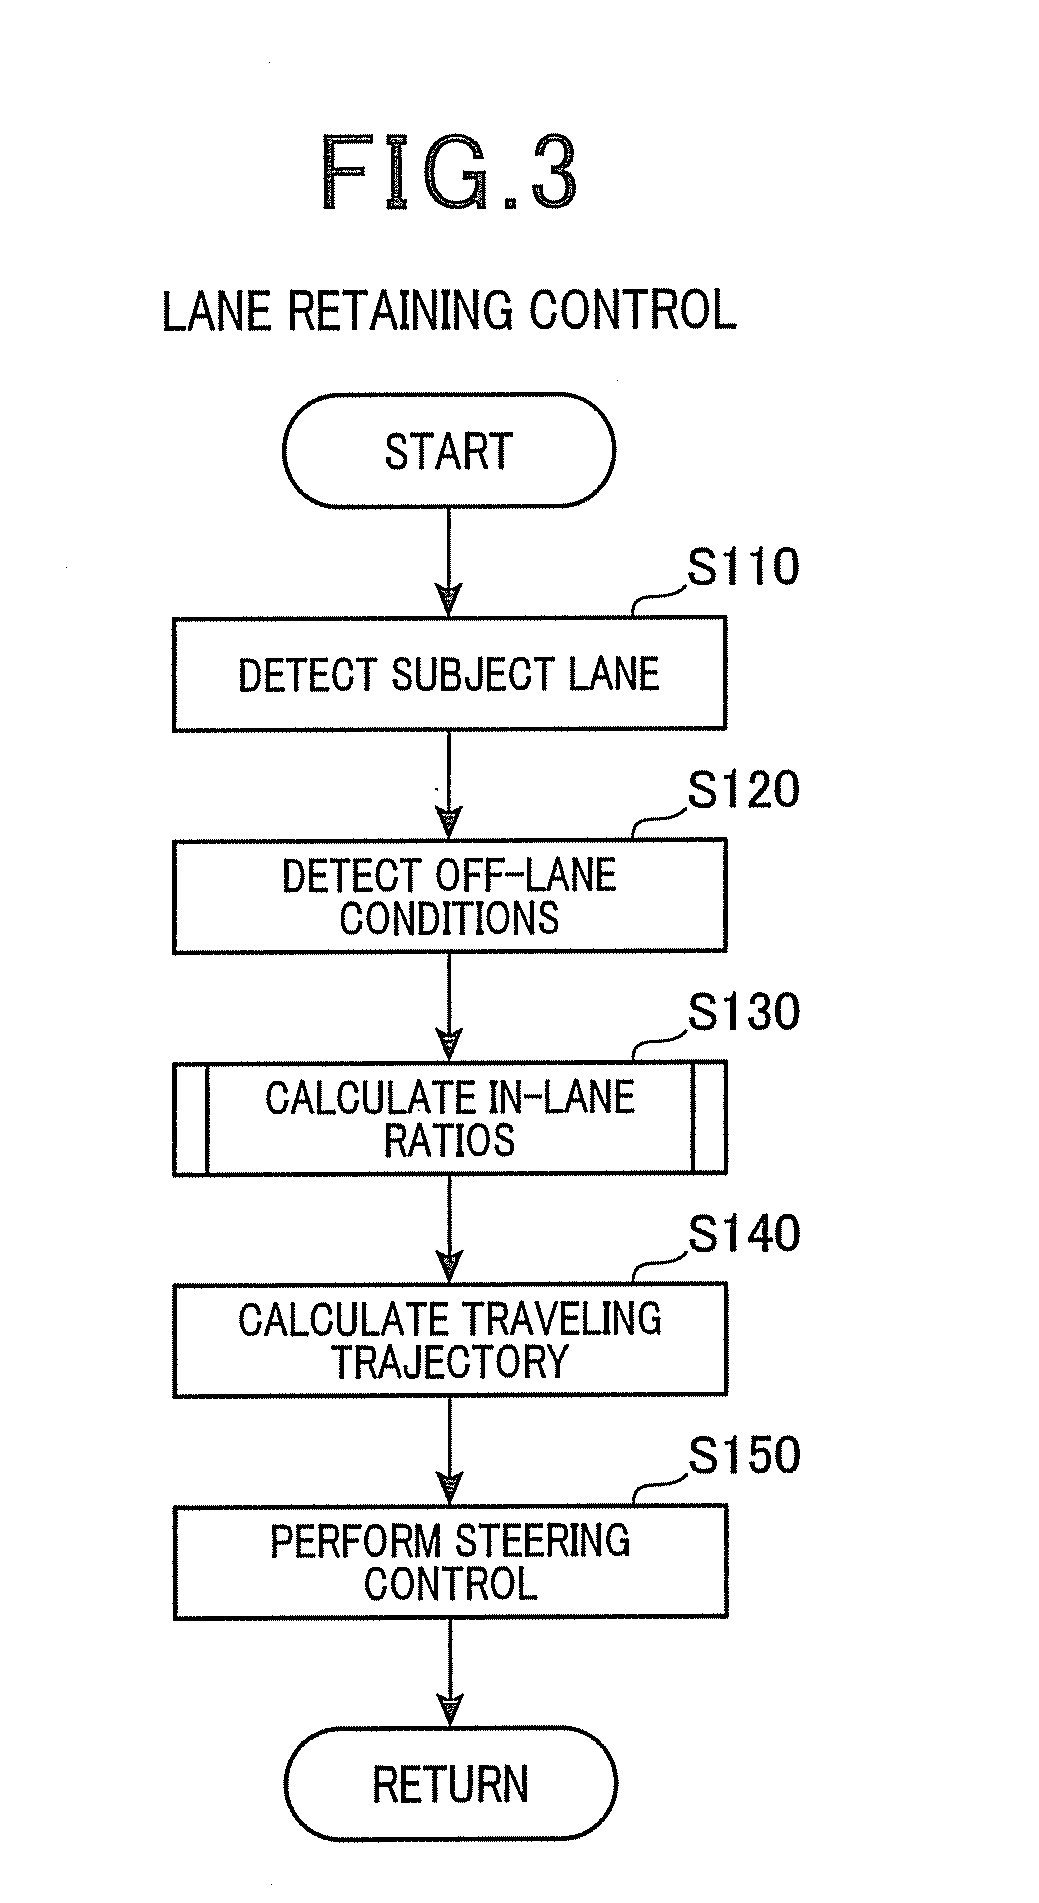 Vehicle automatic steering control apparatus